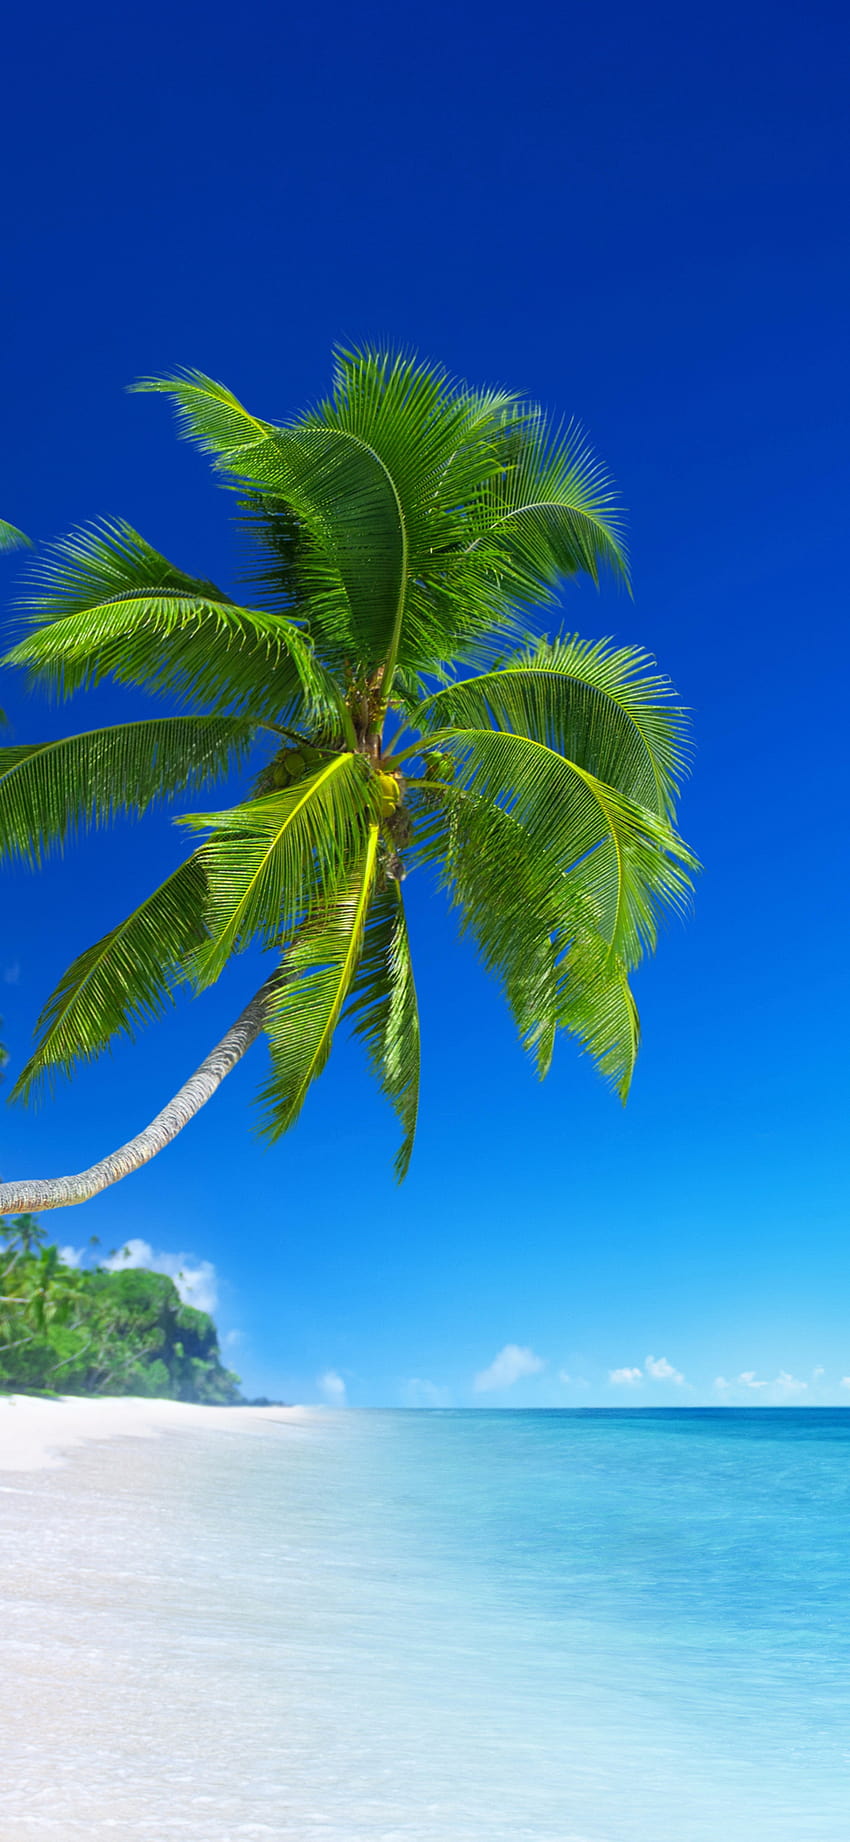 Beach for Phone with of Beautiful Tropical Beach and Coconut Tree, coconut palm HD phone wallpaper